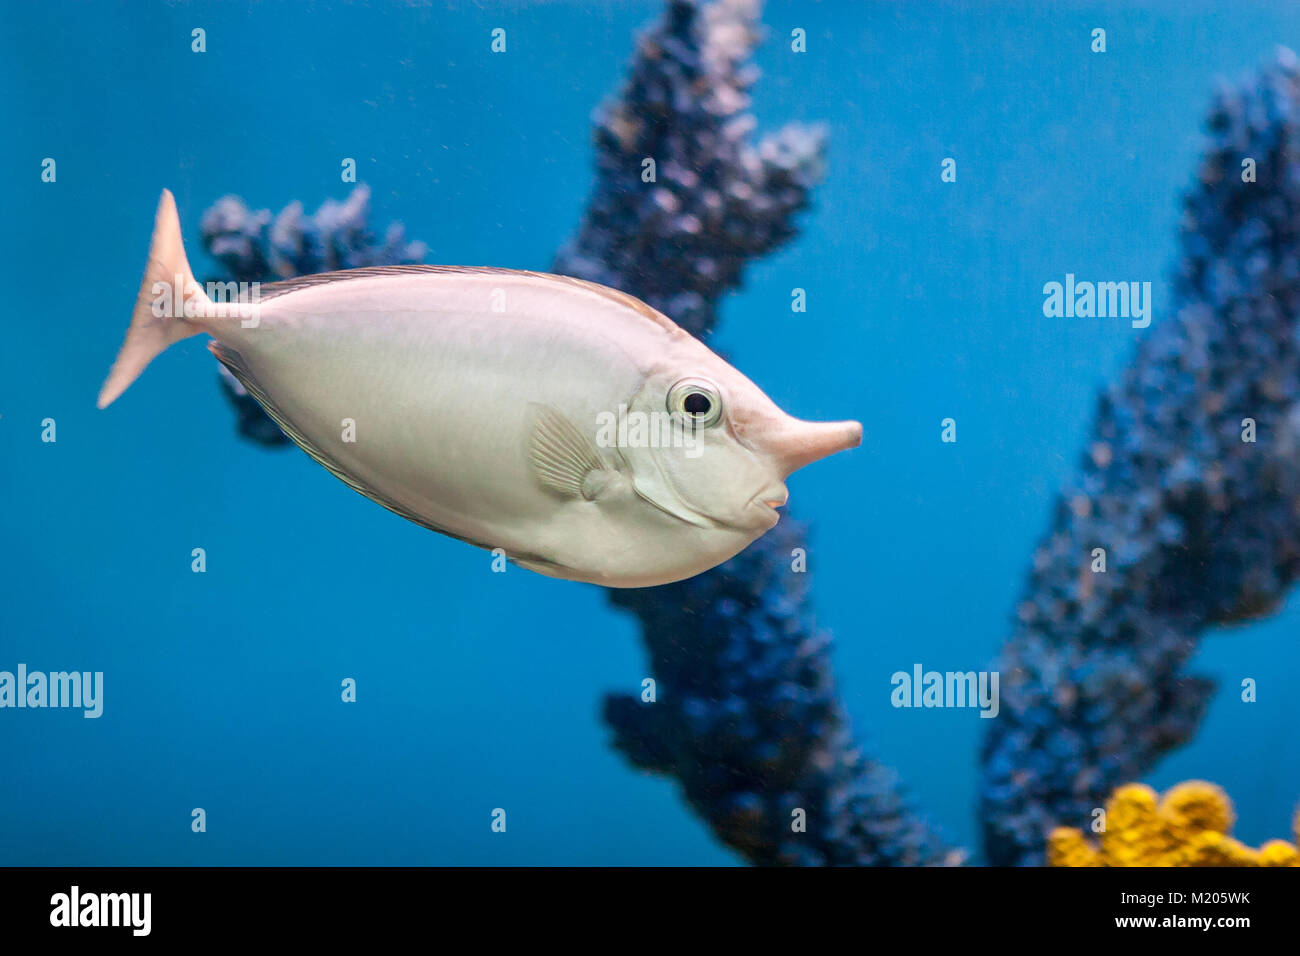 The aquarium is home to this unicorn fish and it is enjoying a trip around his world. Stock Photo